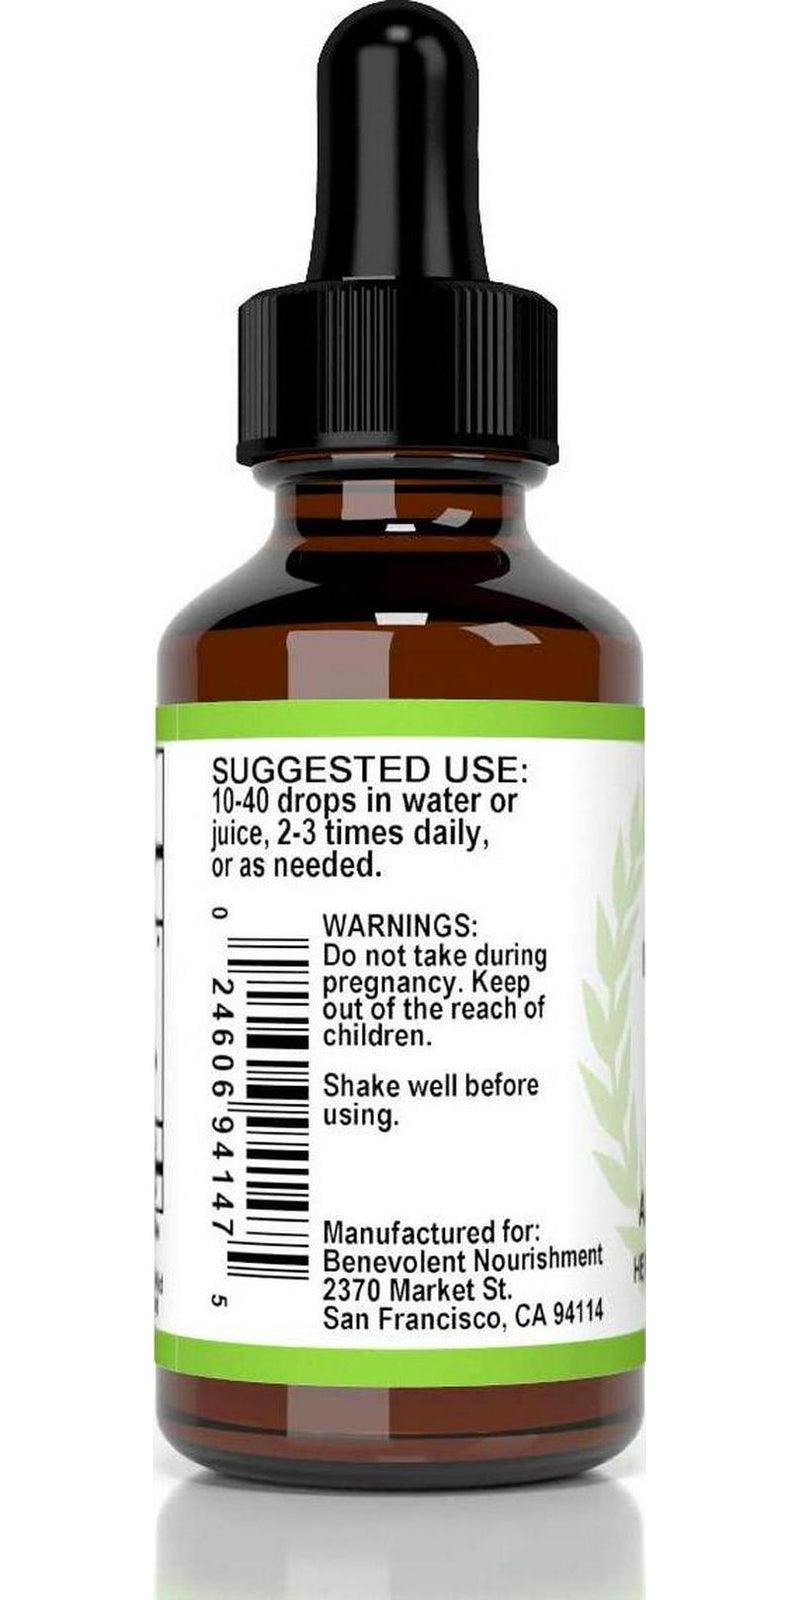 Liver Cleanse and Detox Support Supplement. Easy to Take Potent and Effective Herbal Liquid Drops are 100% Alcohol and Gluten Free.